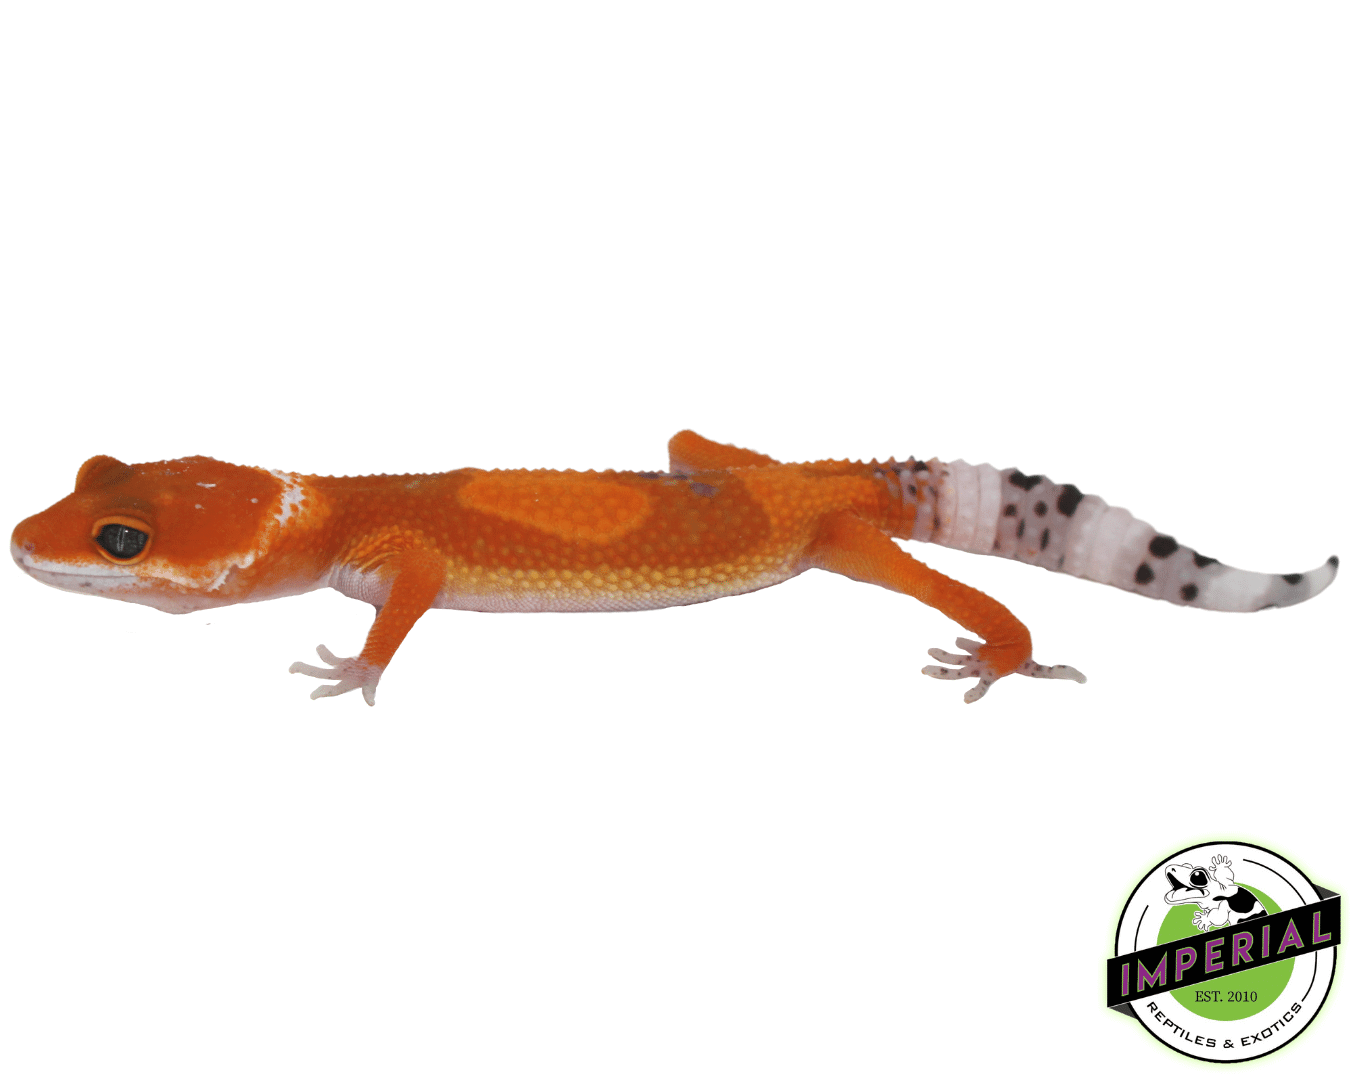 extreme tangerine leopard gecko for sale, buy reptiles online